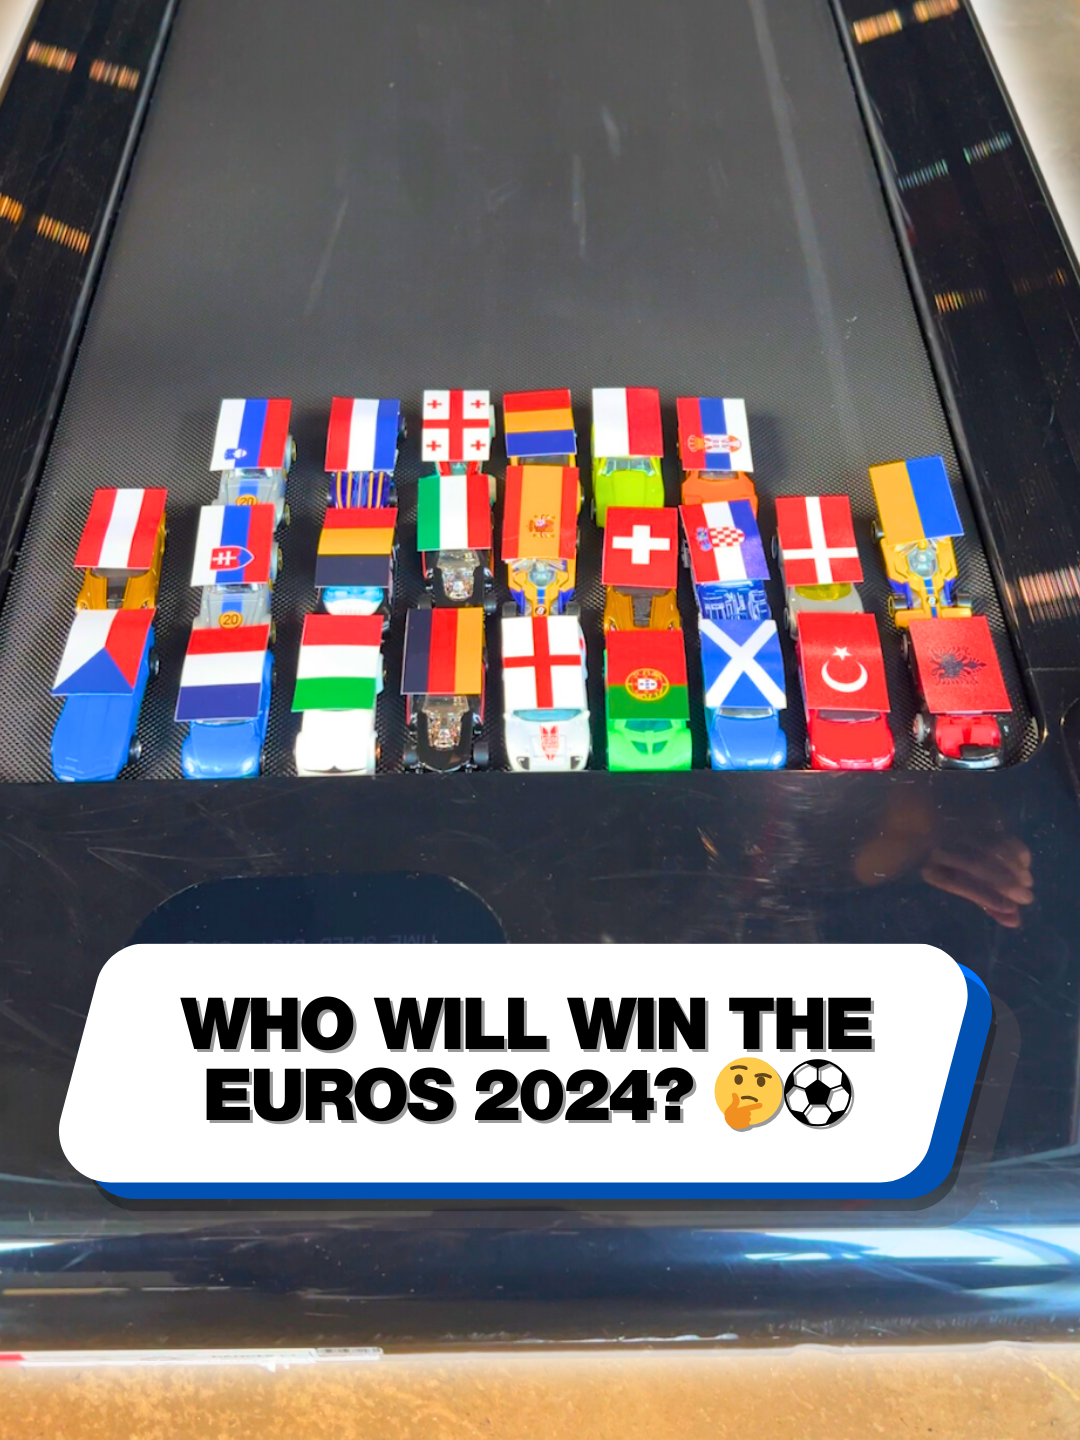 We finally know who's going to win EURO 2024! 🤯 Do you agree? 👀  #footballtiktok #EURO2024 #Soccer #challenge #supercarblondie #treadmill #race